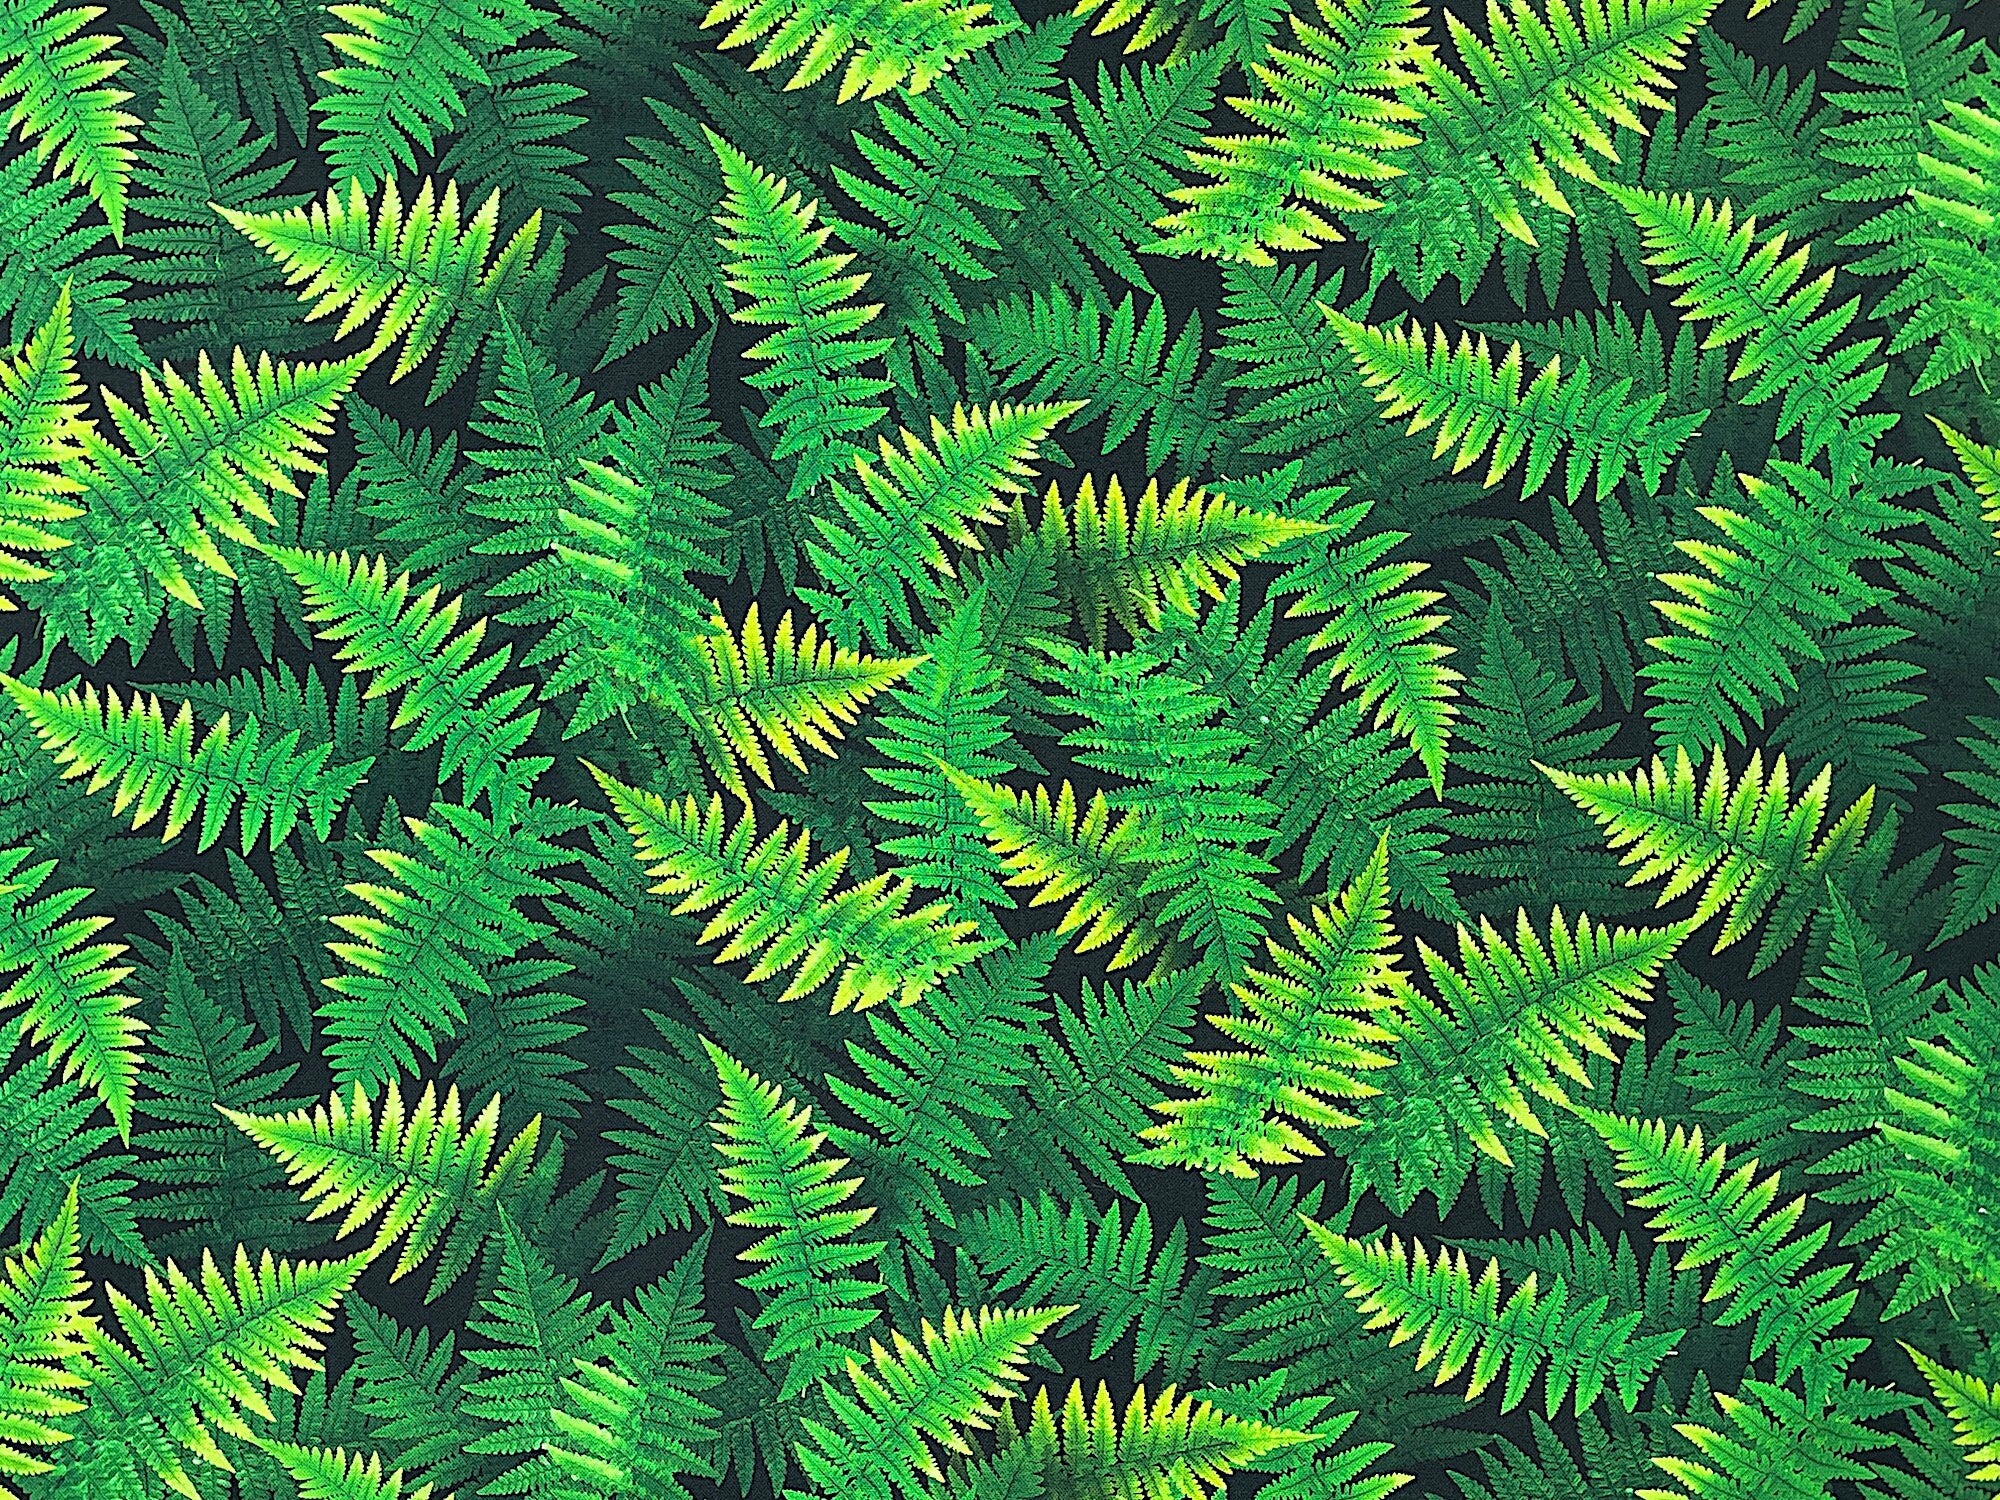 This cotton fabric is covered with green ferns. Some of the ferns have yellow tips. 